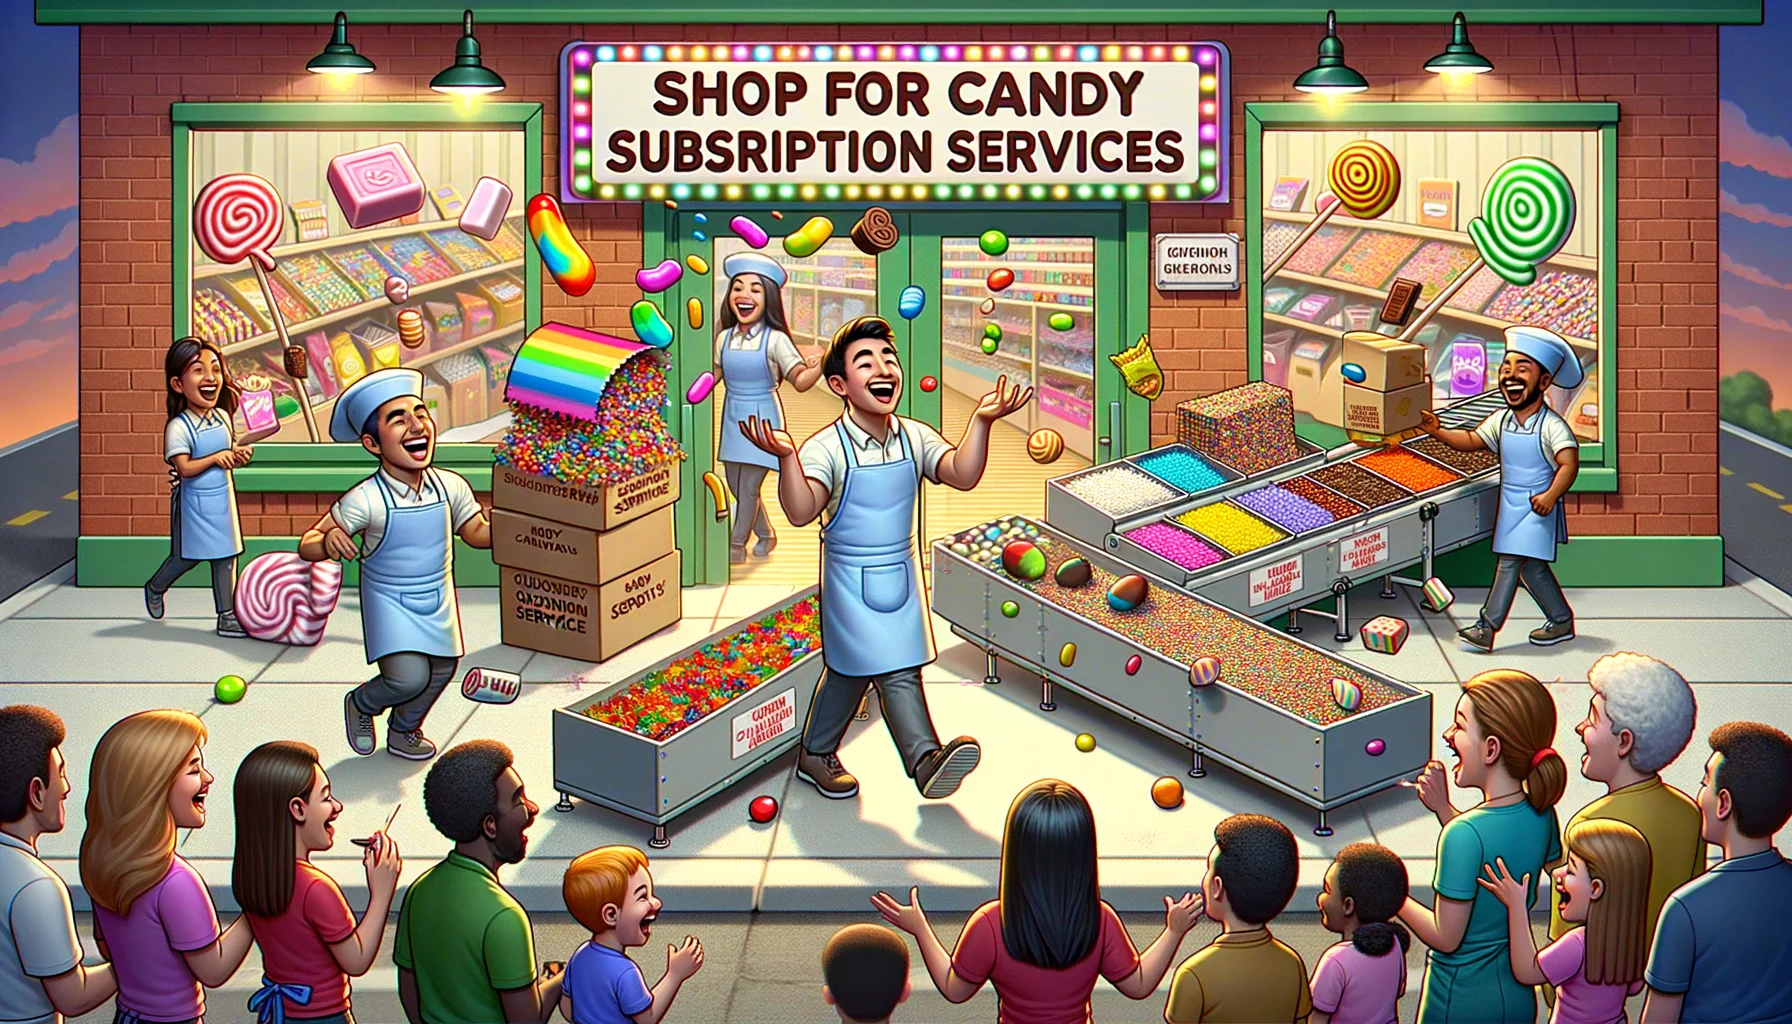 Imagine a humorous scenario at a candy subscription service store, set in a bustling small town. The front entrance displays a vibrant array of multicolored candies, lollipops, and chocolate bars. Two cheerful employees, a South Asian man and a Hispanic woman, are juggling gummy worms and throwing large marshmallows to each other. Between them, a conveyor belt transports boxes filled with various sweets to the packing area. Customers, both adults and children of different descents and genders, are laughing and pointing at the playful scene, while other staff are busy wrapping candy boxes with bright, flashy ribbons. The sign overhead reads, 'Shop for Candy Subscription Services.'